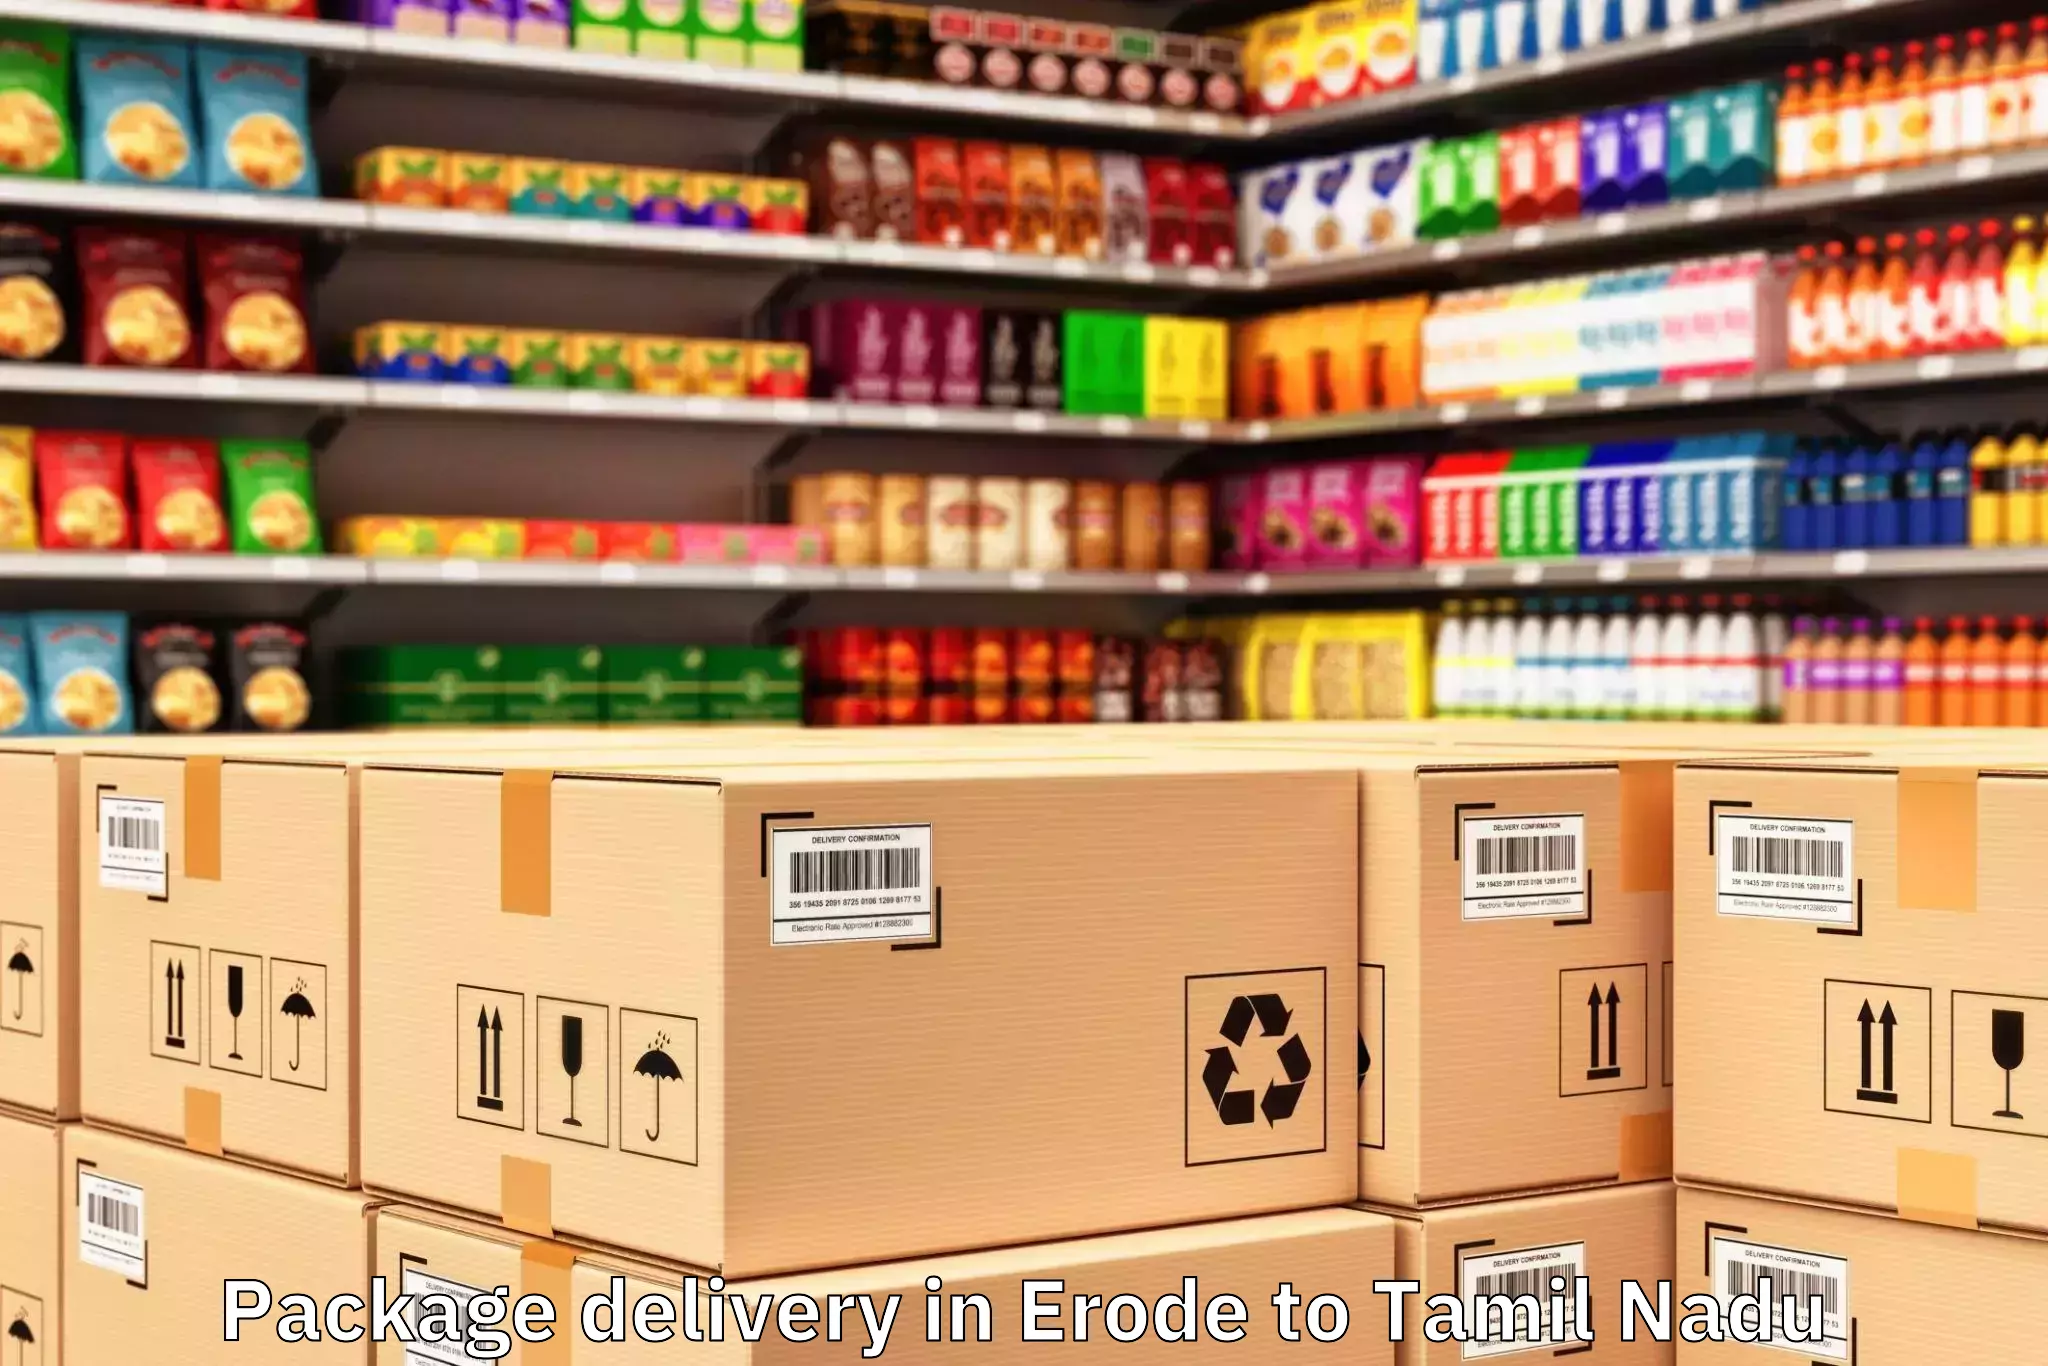 Discover Erode to Thirumangalam Package Delivery